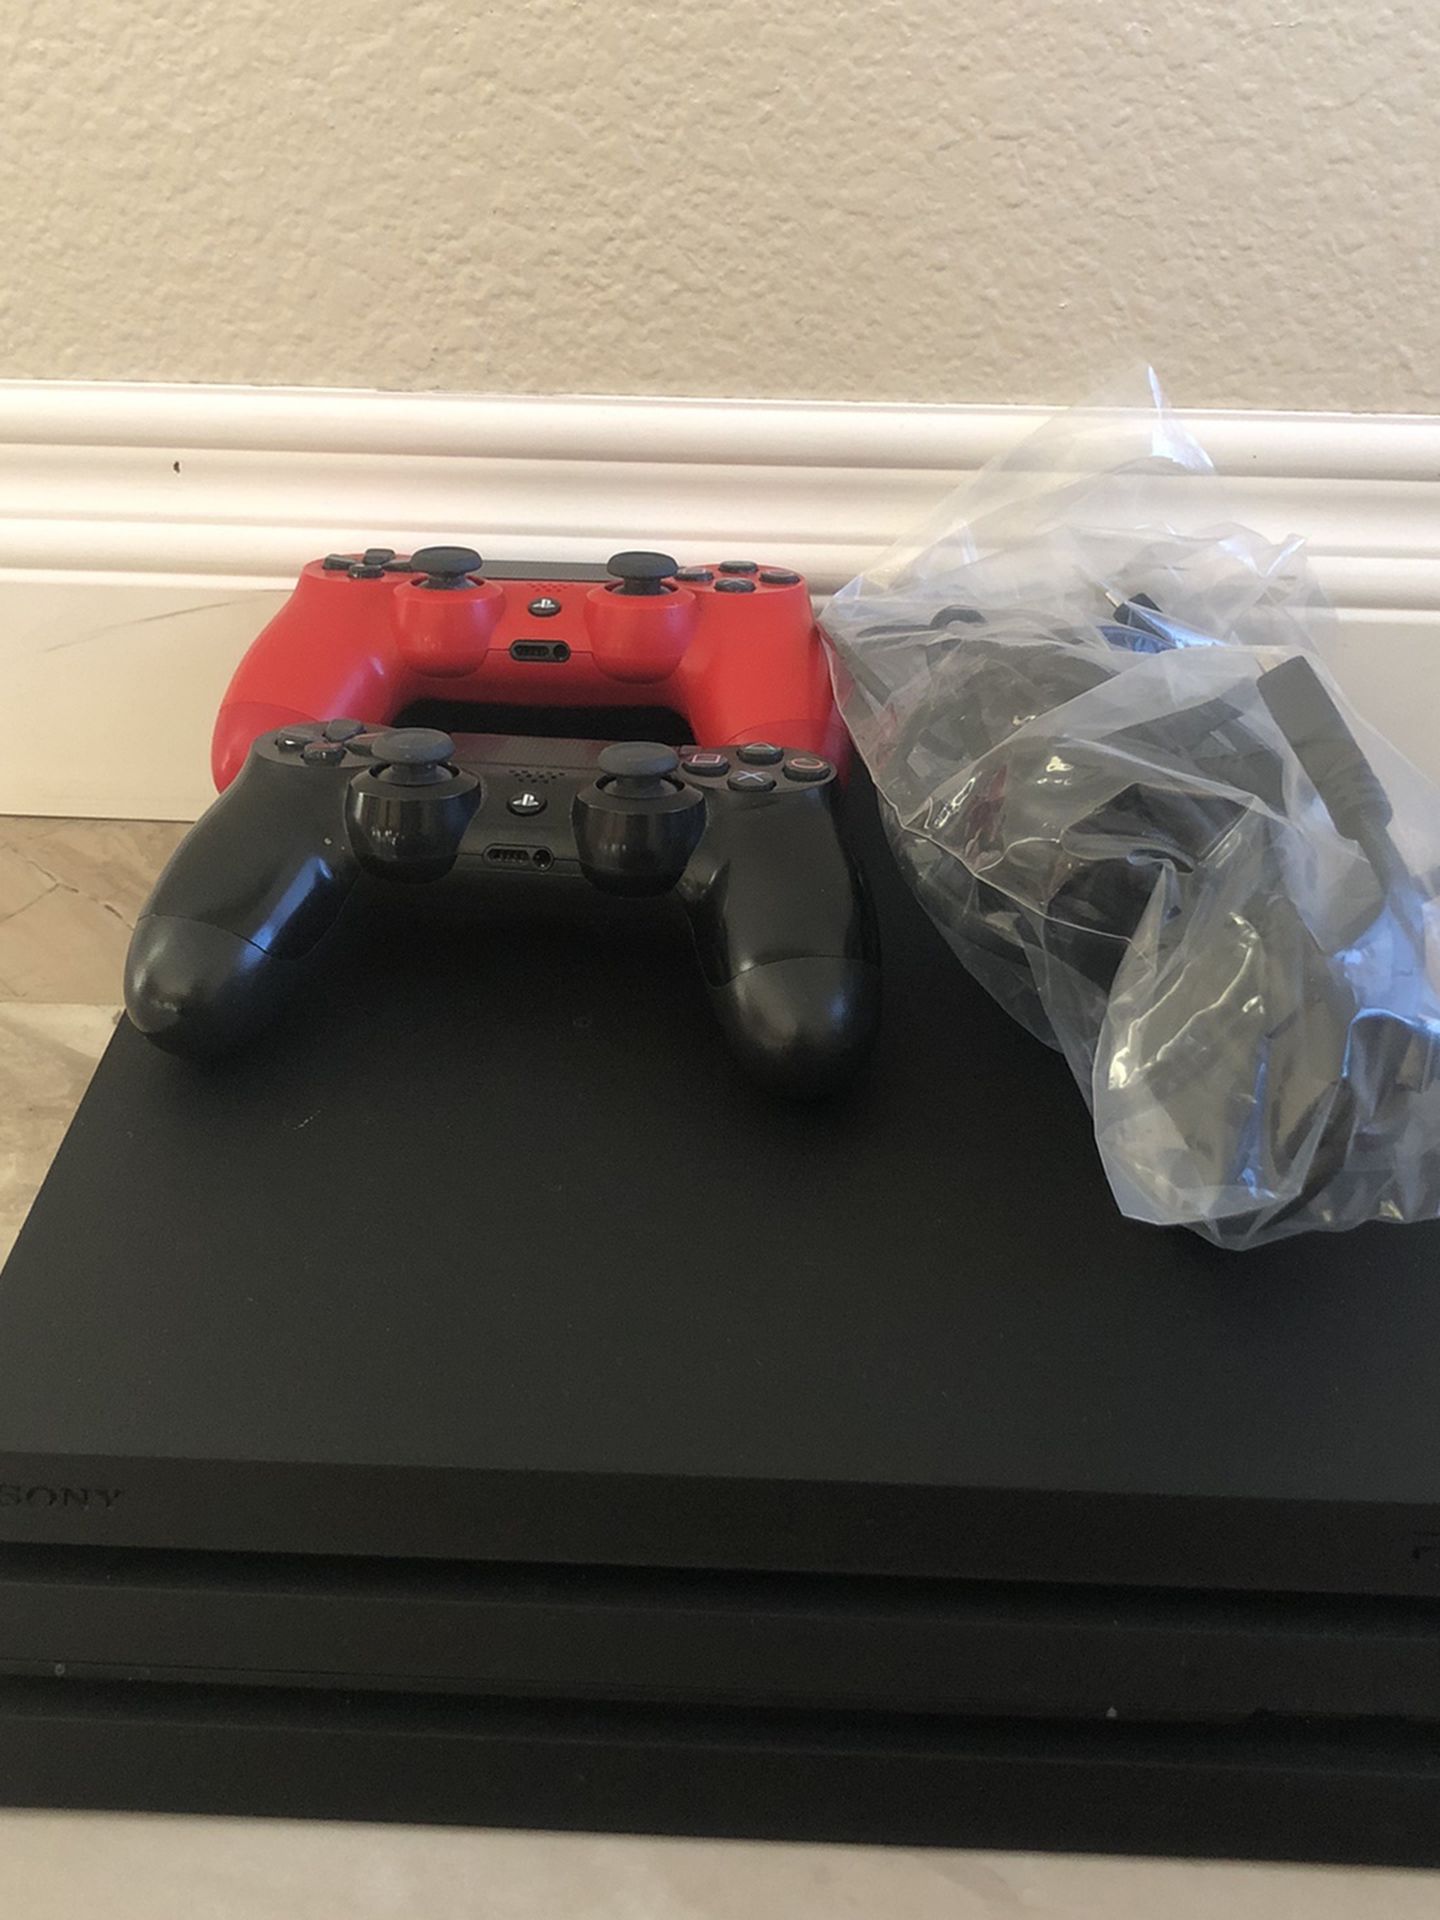 Ps4 Pro 1tb with games and controller